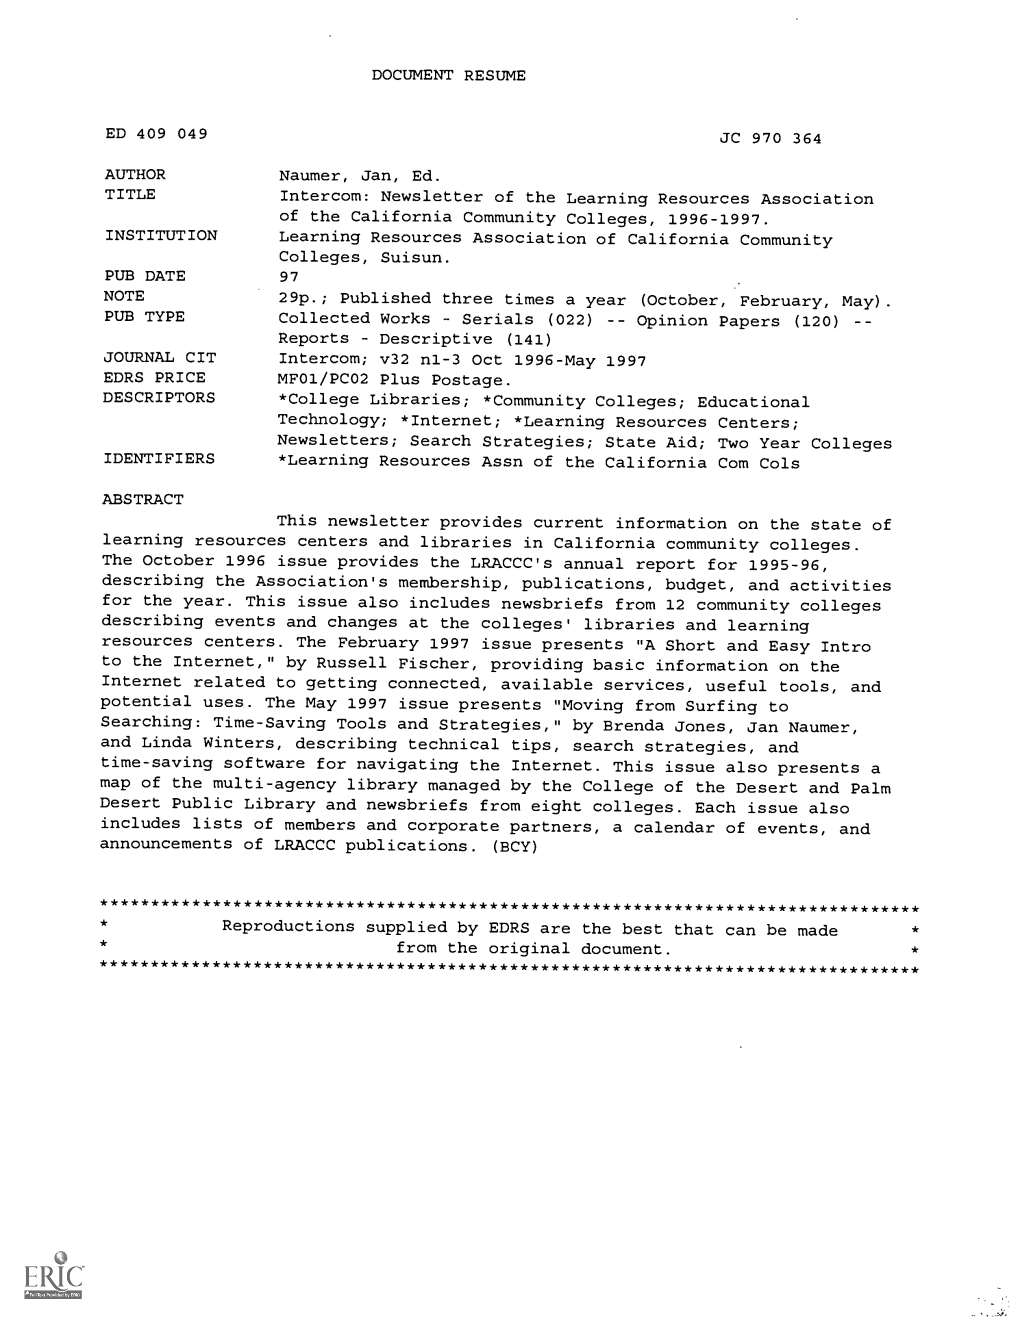 Intercom: Newsletter of the Learning Resources Association of the California Community Colleges, 1996-1997